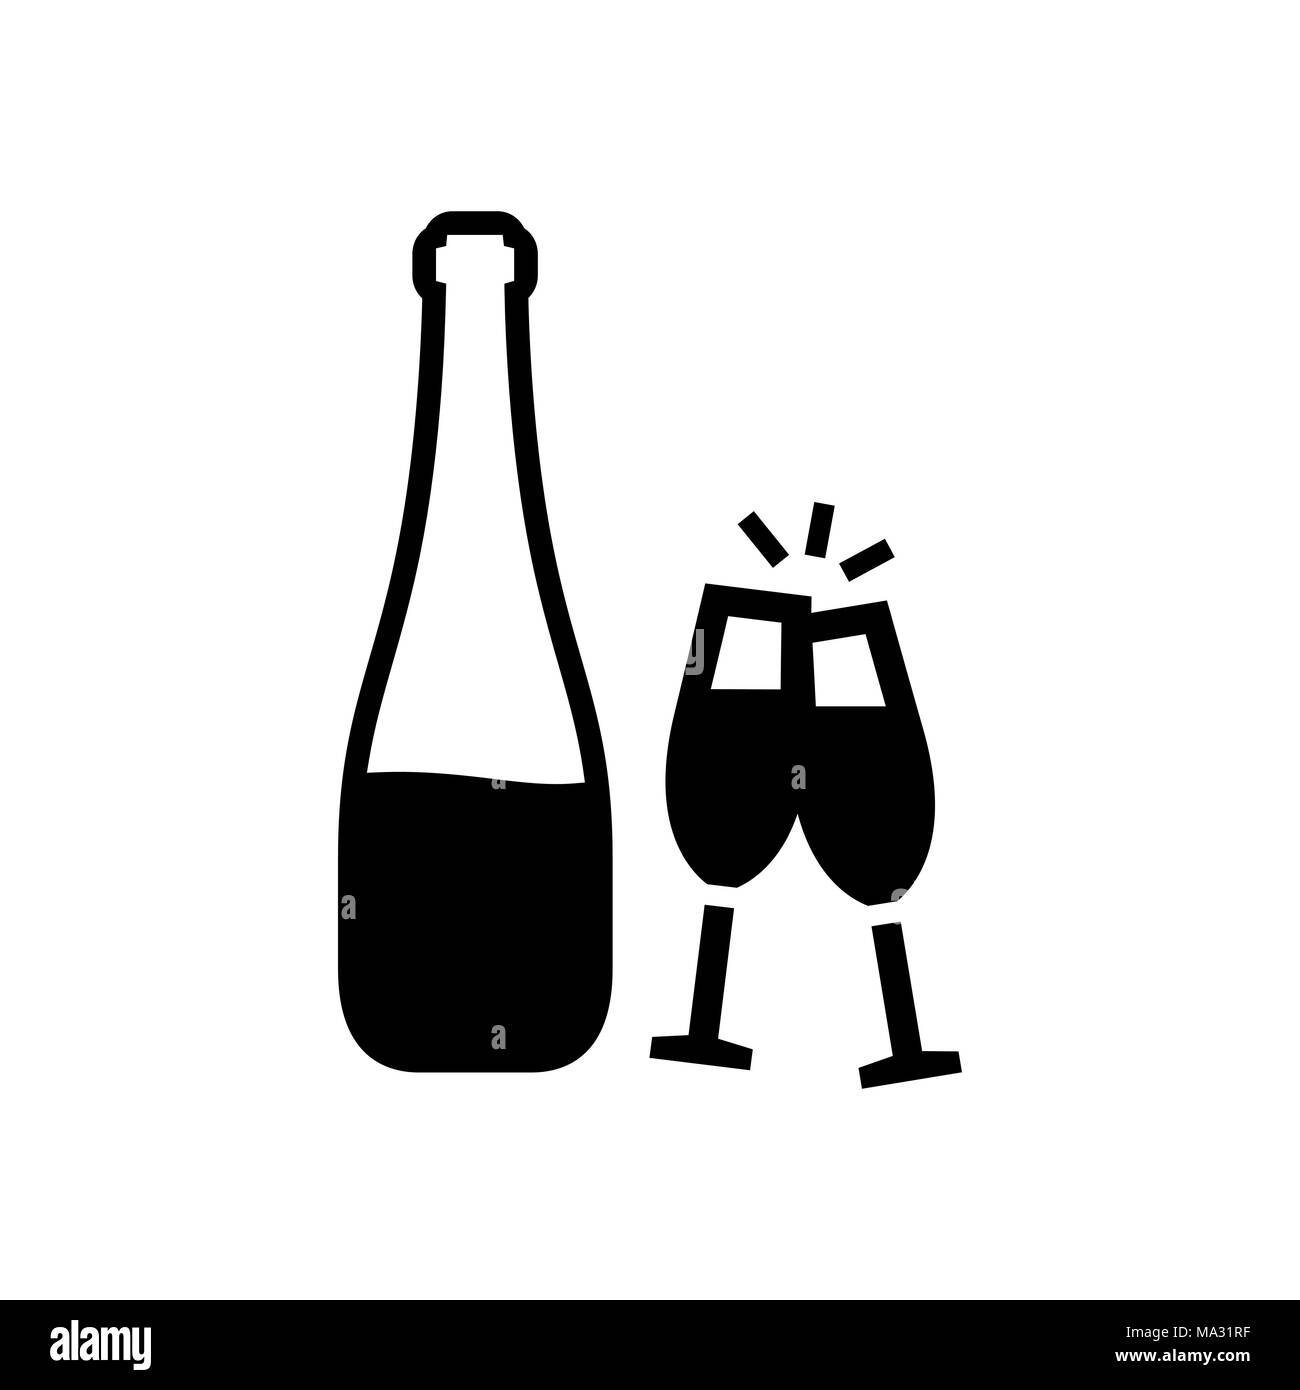 Wine bottle with glasses icon simple flat style illustration. Stock Vector